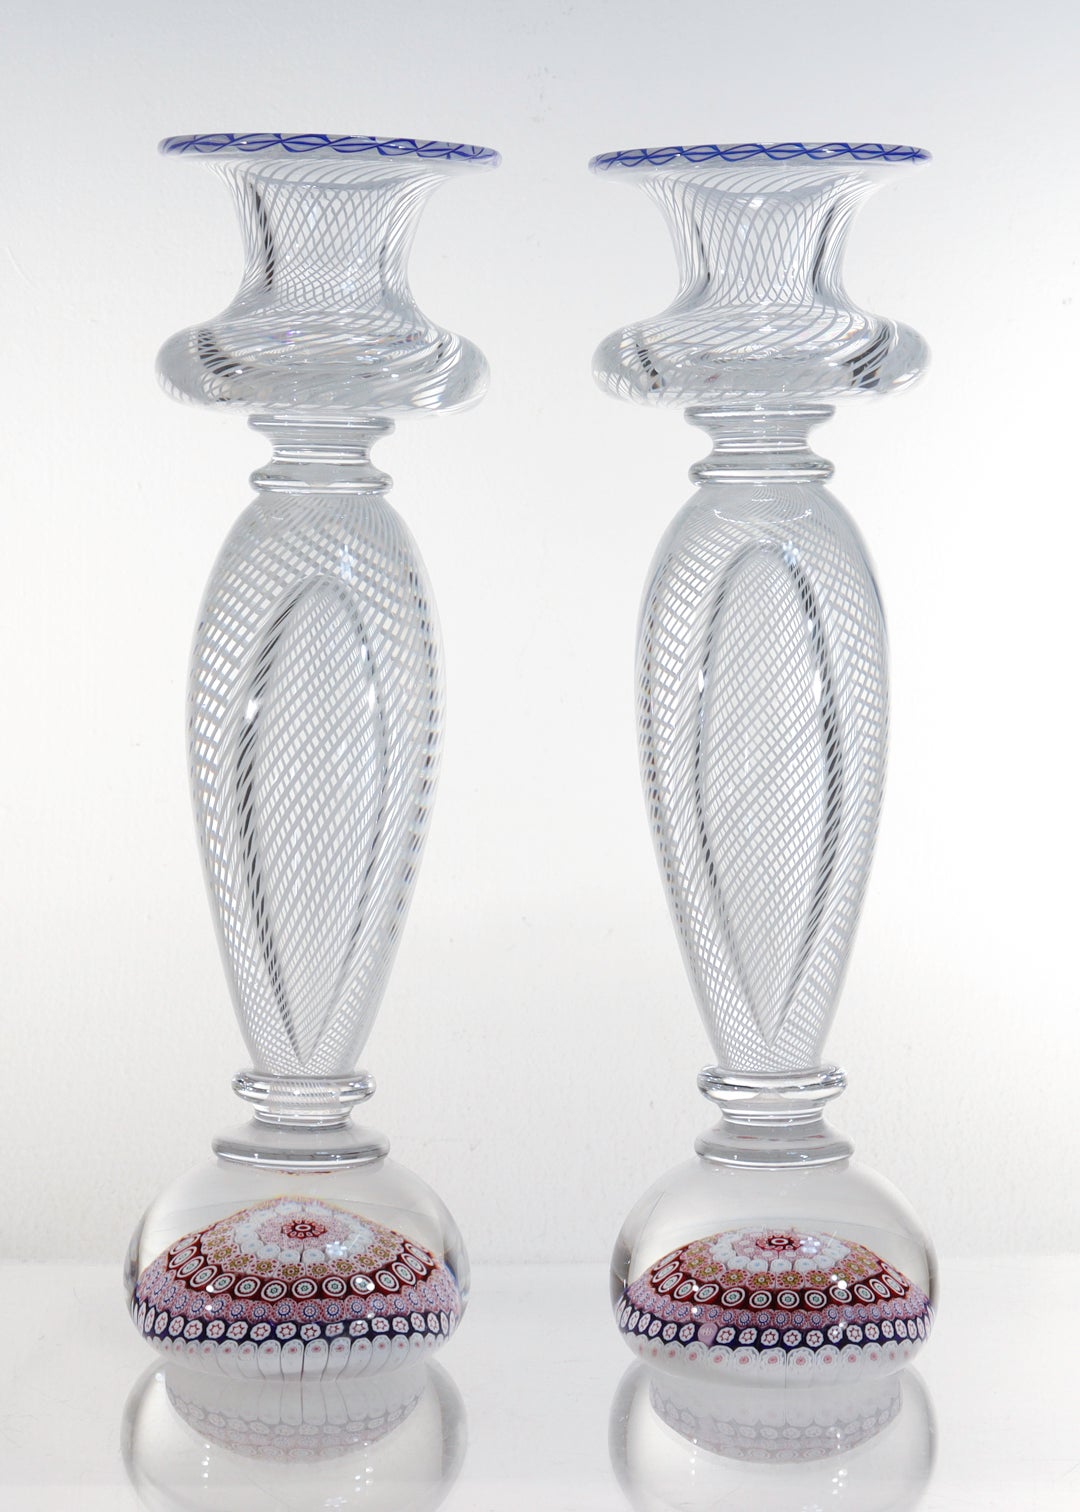 A rare pair of French paperweight candlesticks.

By the St. Louis Glass Company.

With latticino candle cups and bodies supported by paperweight bases with rows of concentric millefiori canes.

Each candle cups is finished with a blue and white